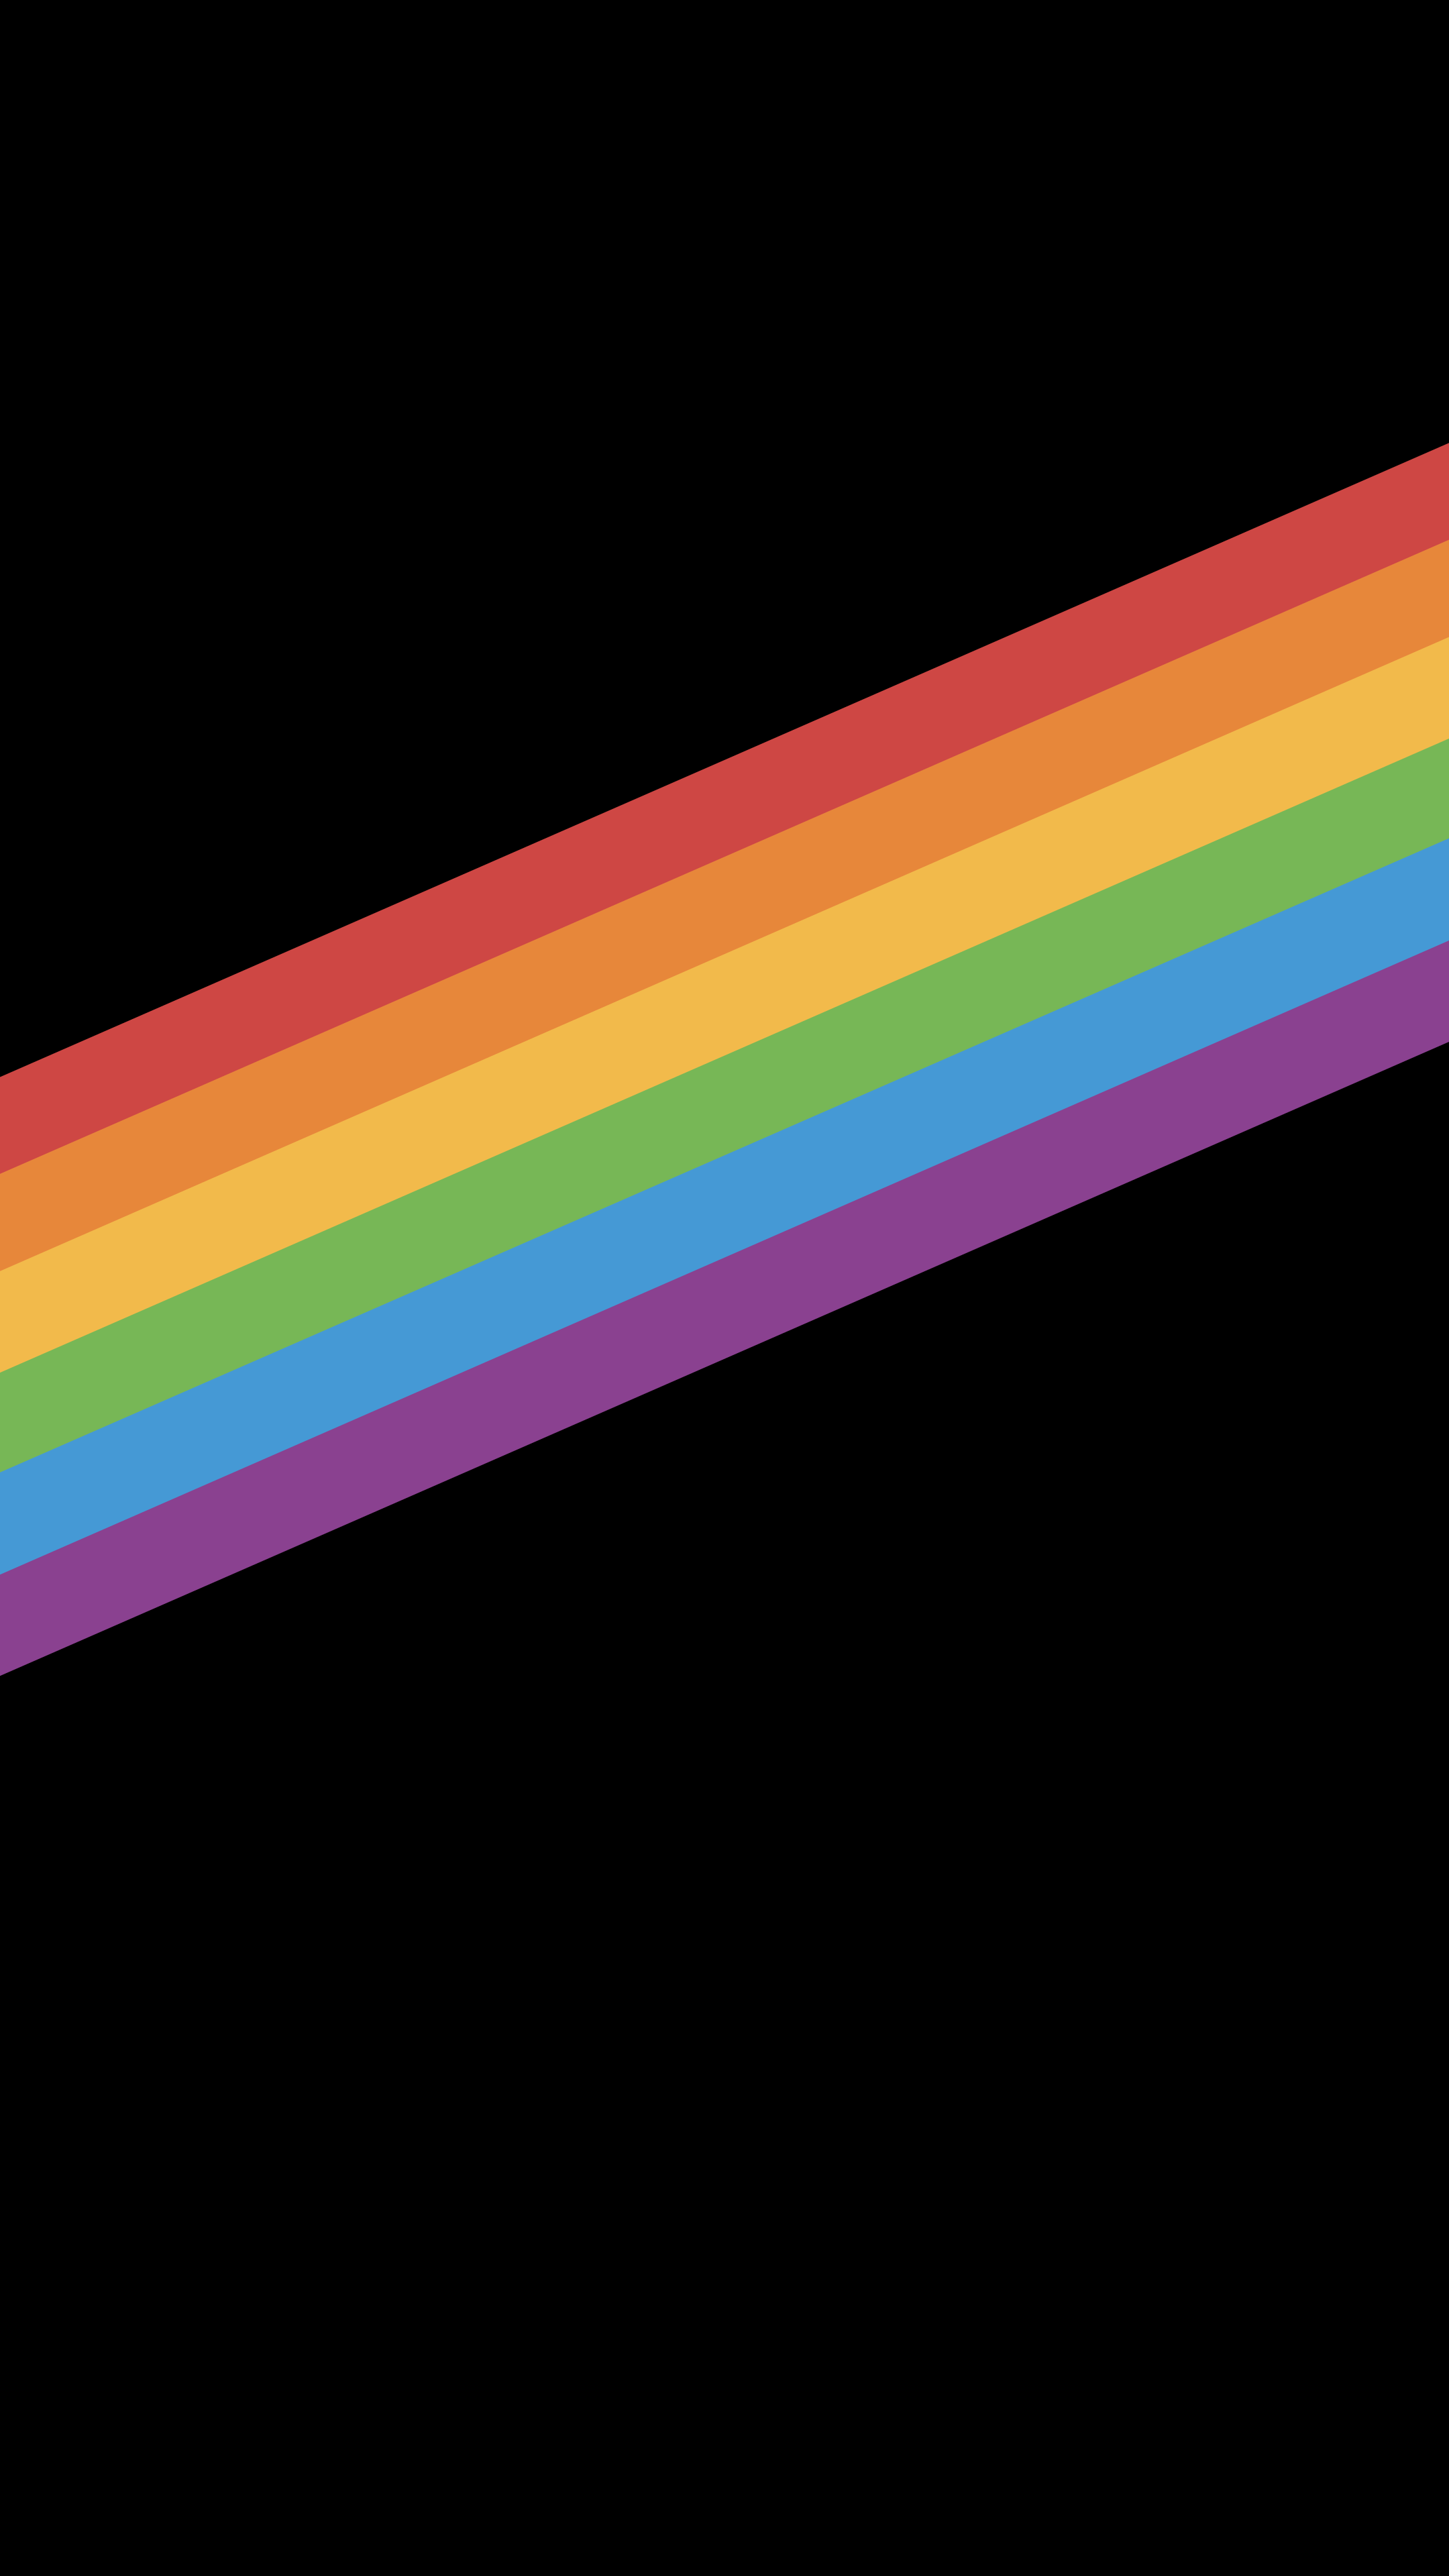 Picture Made this simple pride phone wallpaper back in June based on a similar Apple one I found that I thought y'all may like